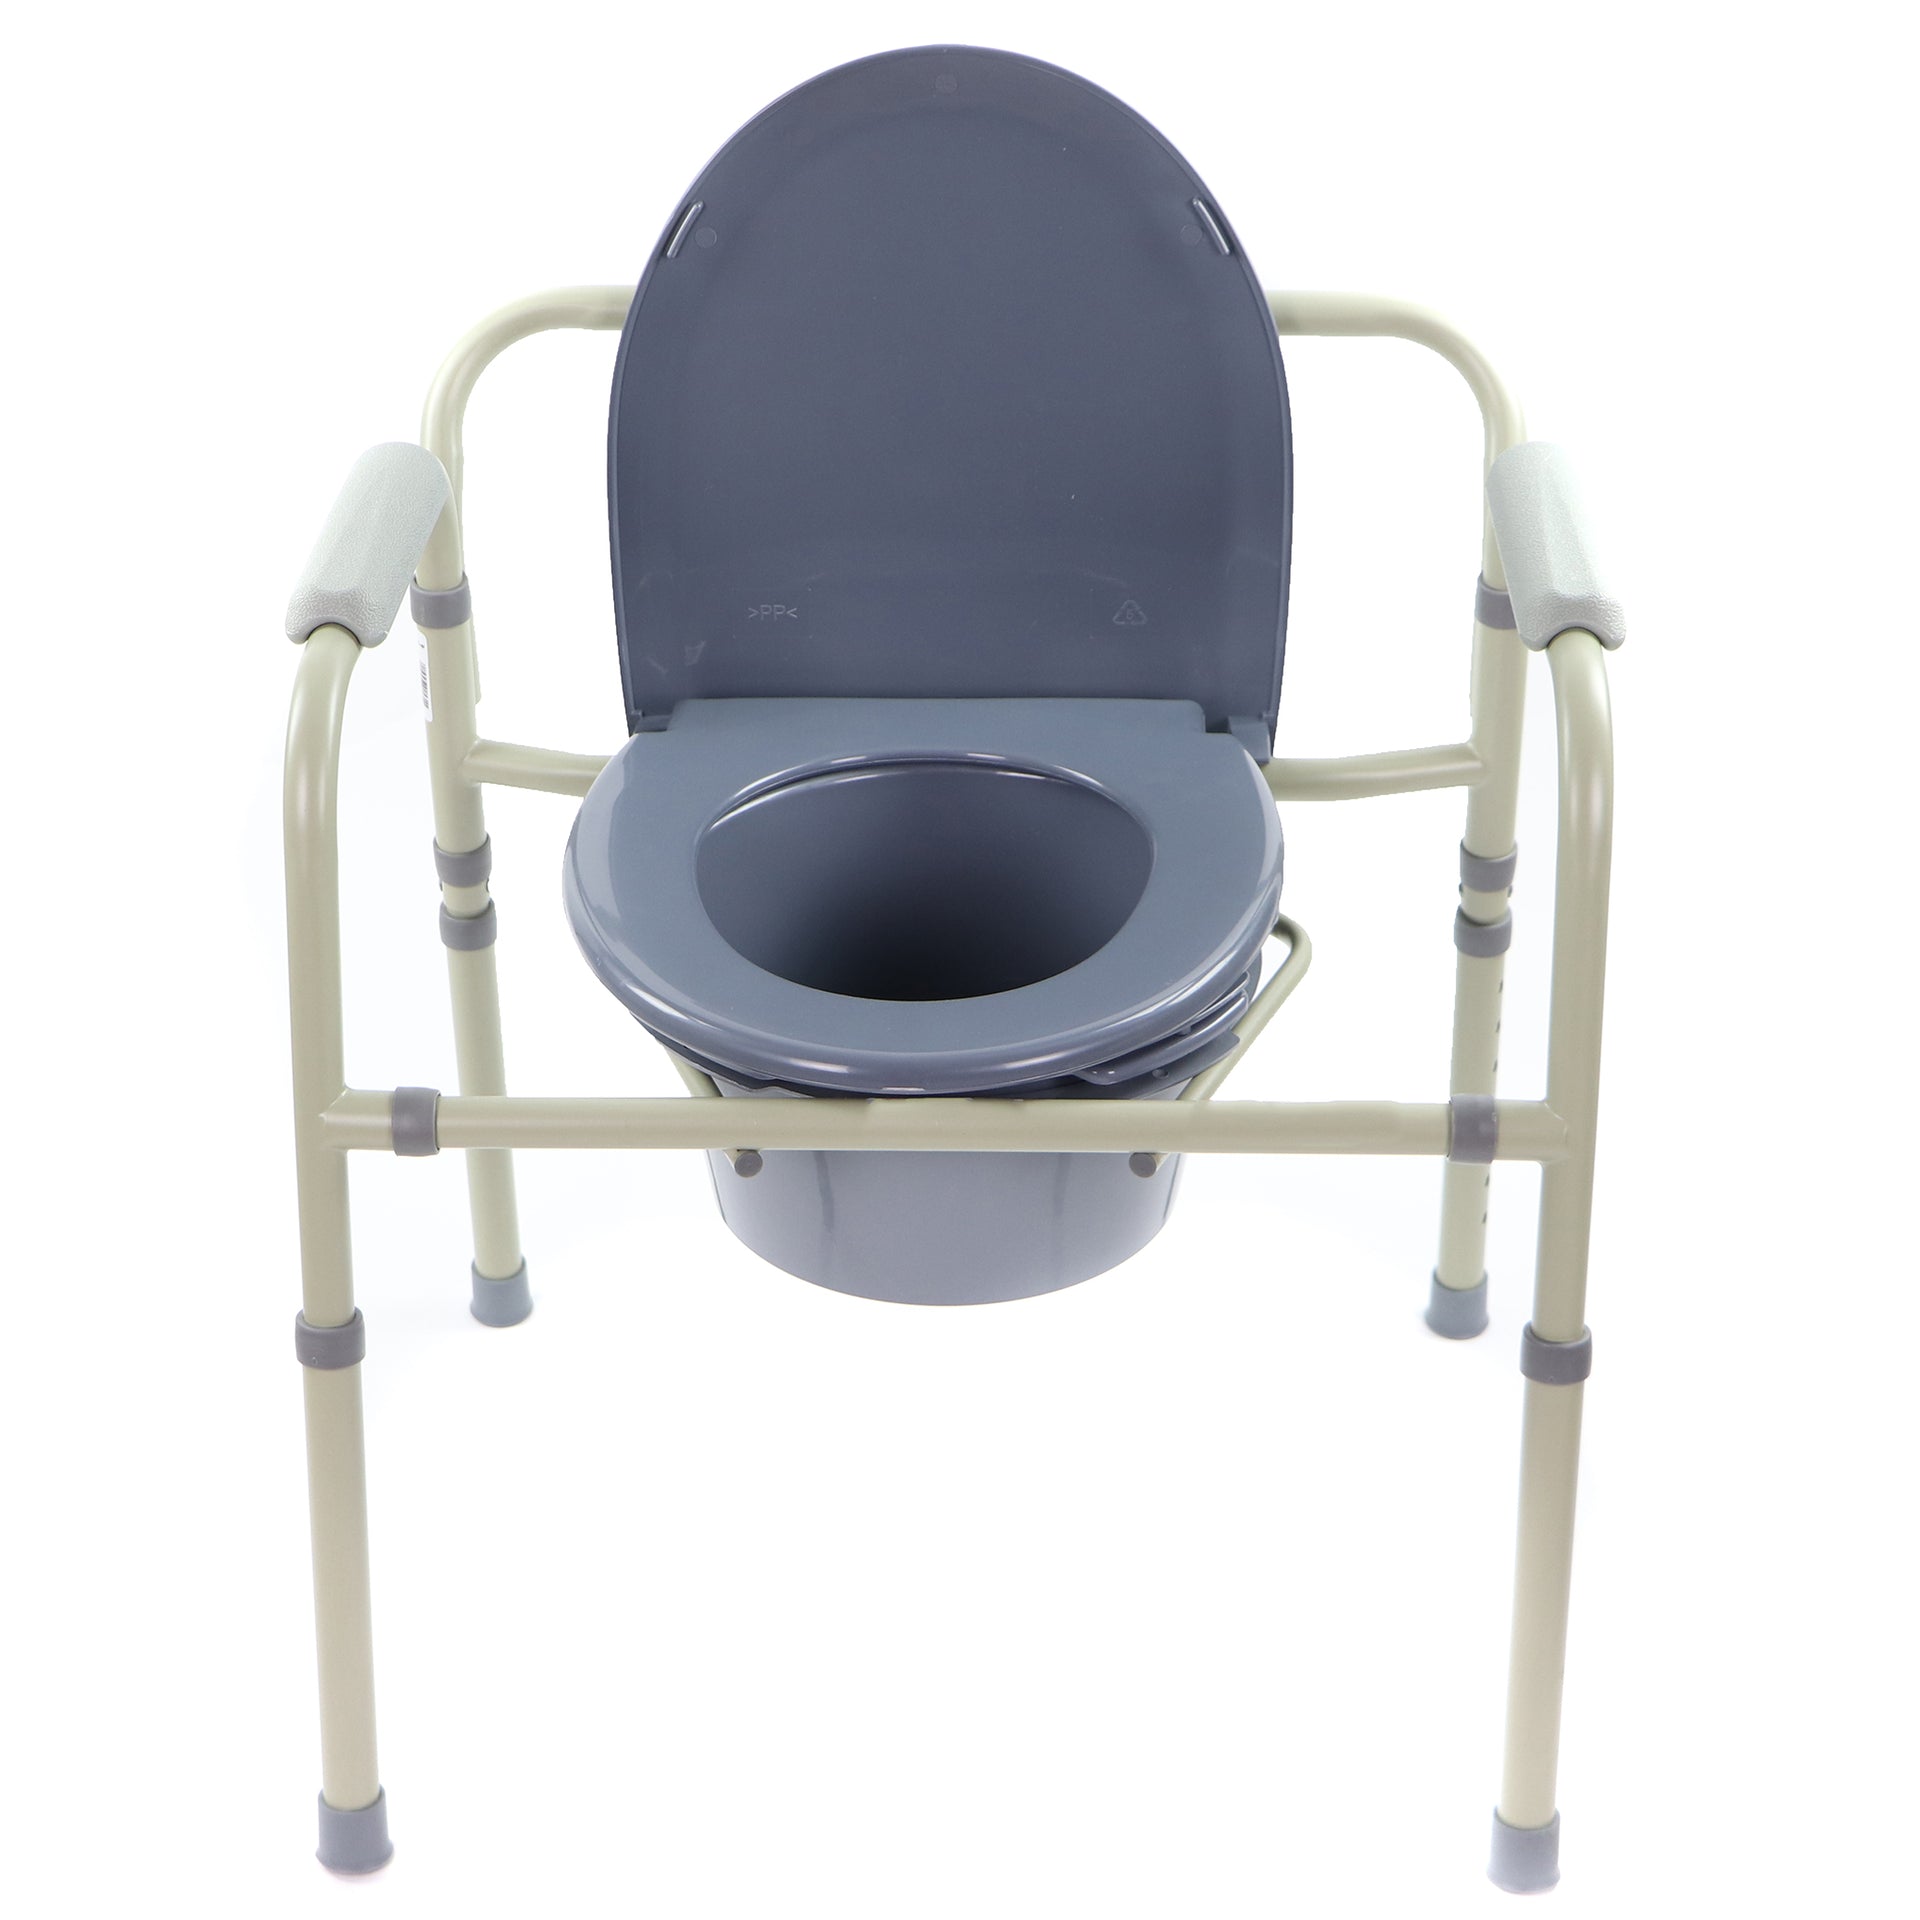 Chaise d'aisance mobile avec shampooing inclinable